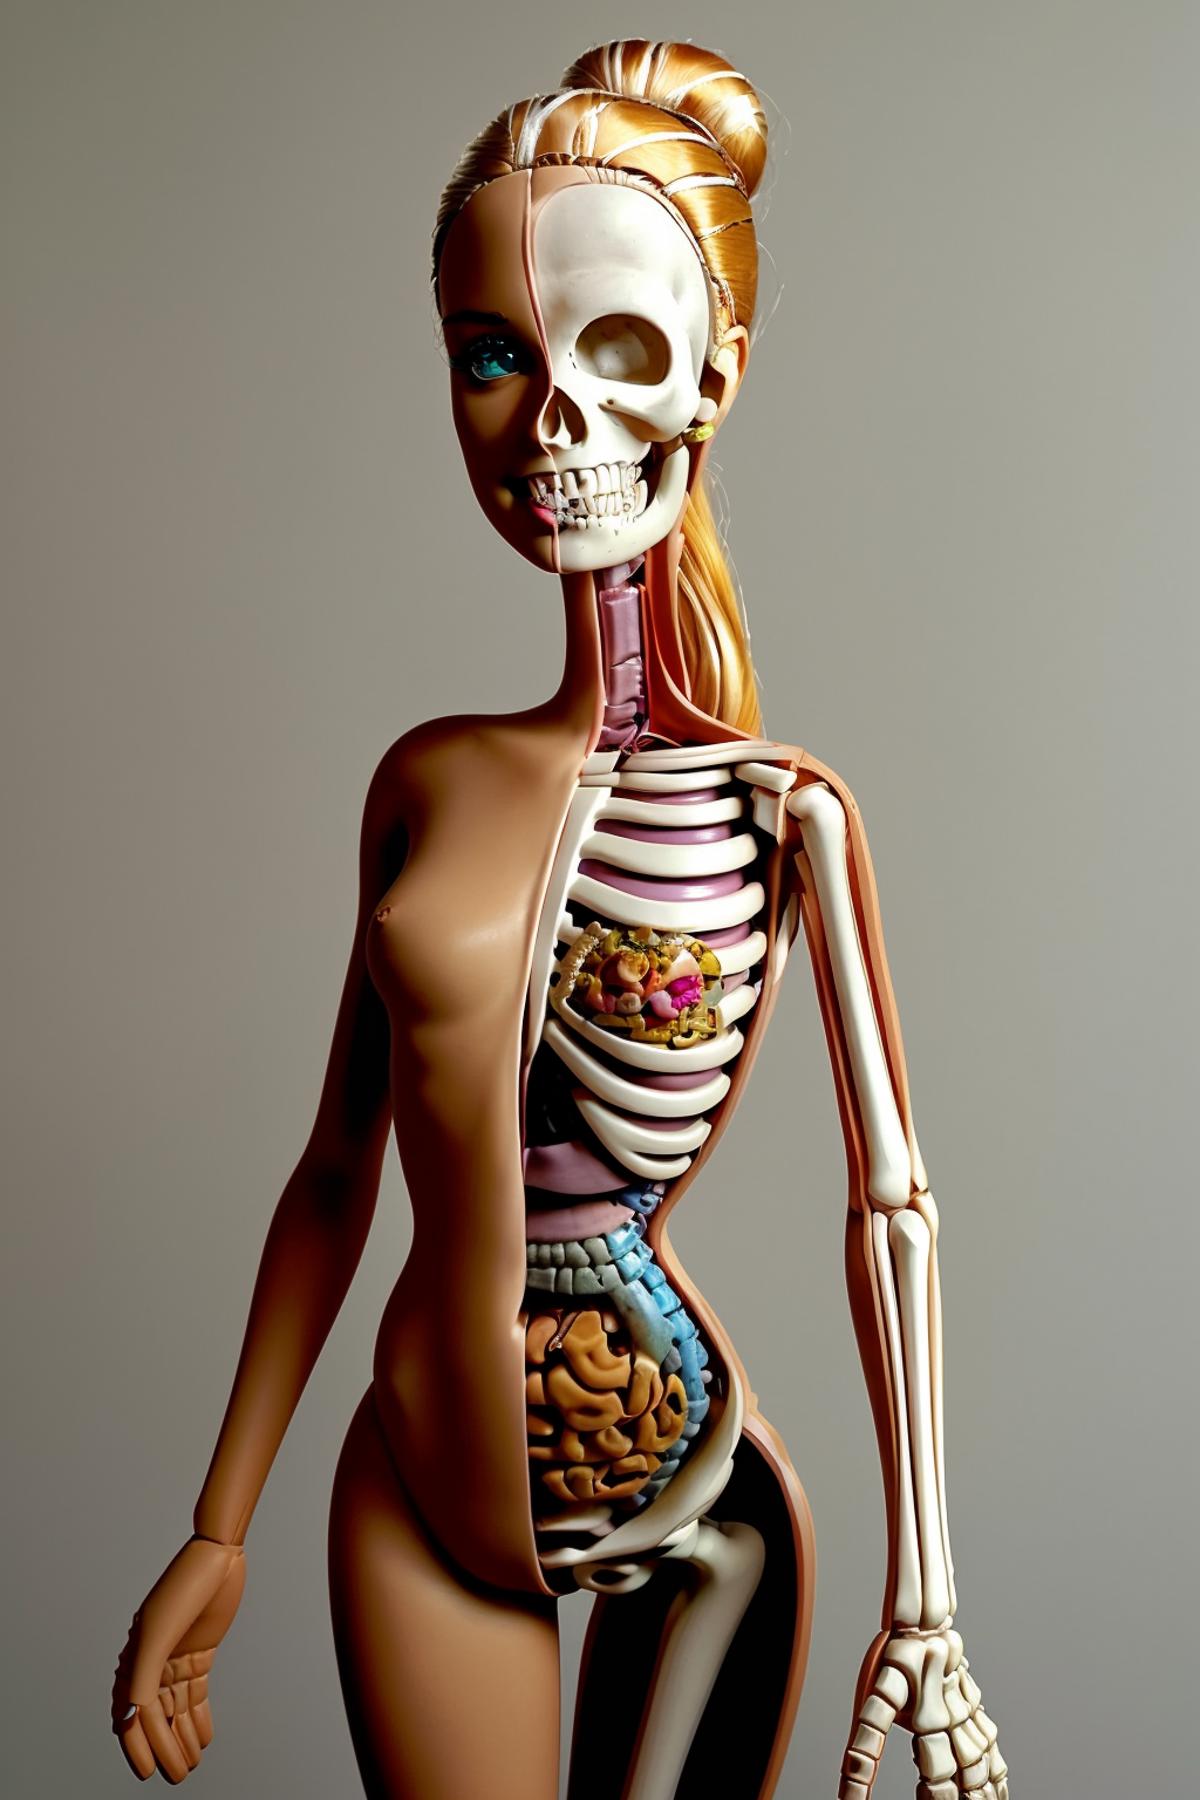 Artistic Anatomical Model of a Female Skeleton with Skull Head and Internal Organs